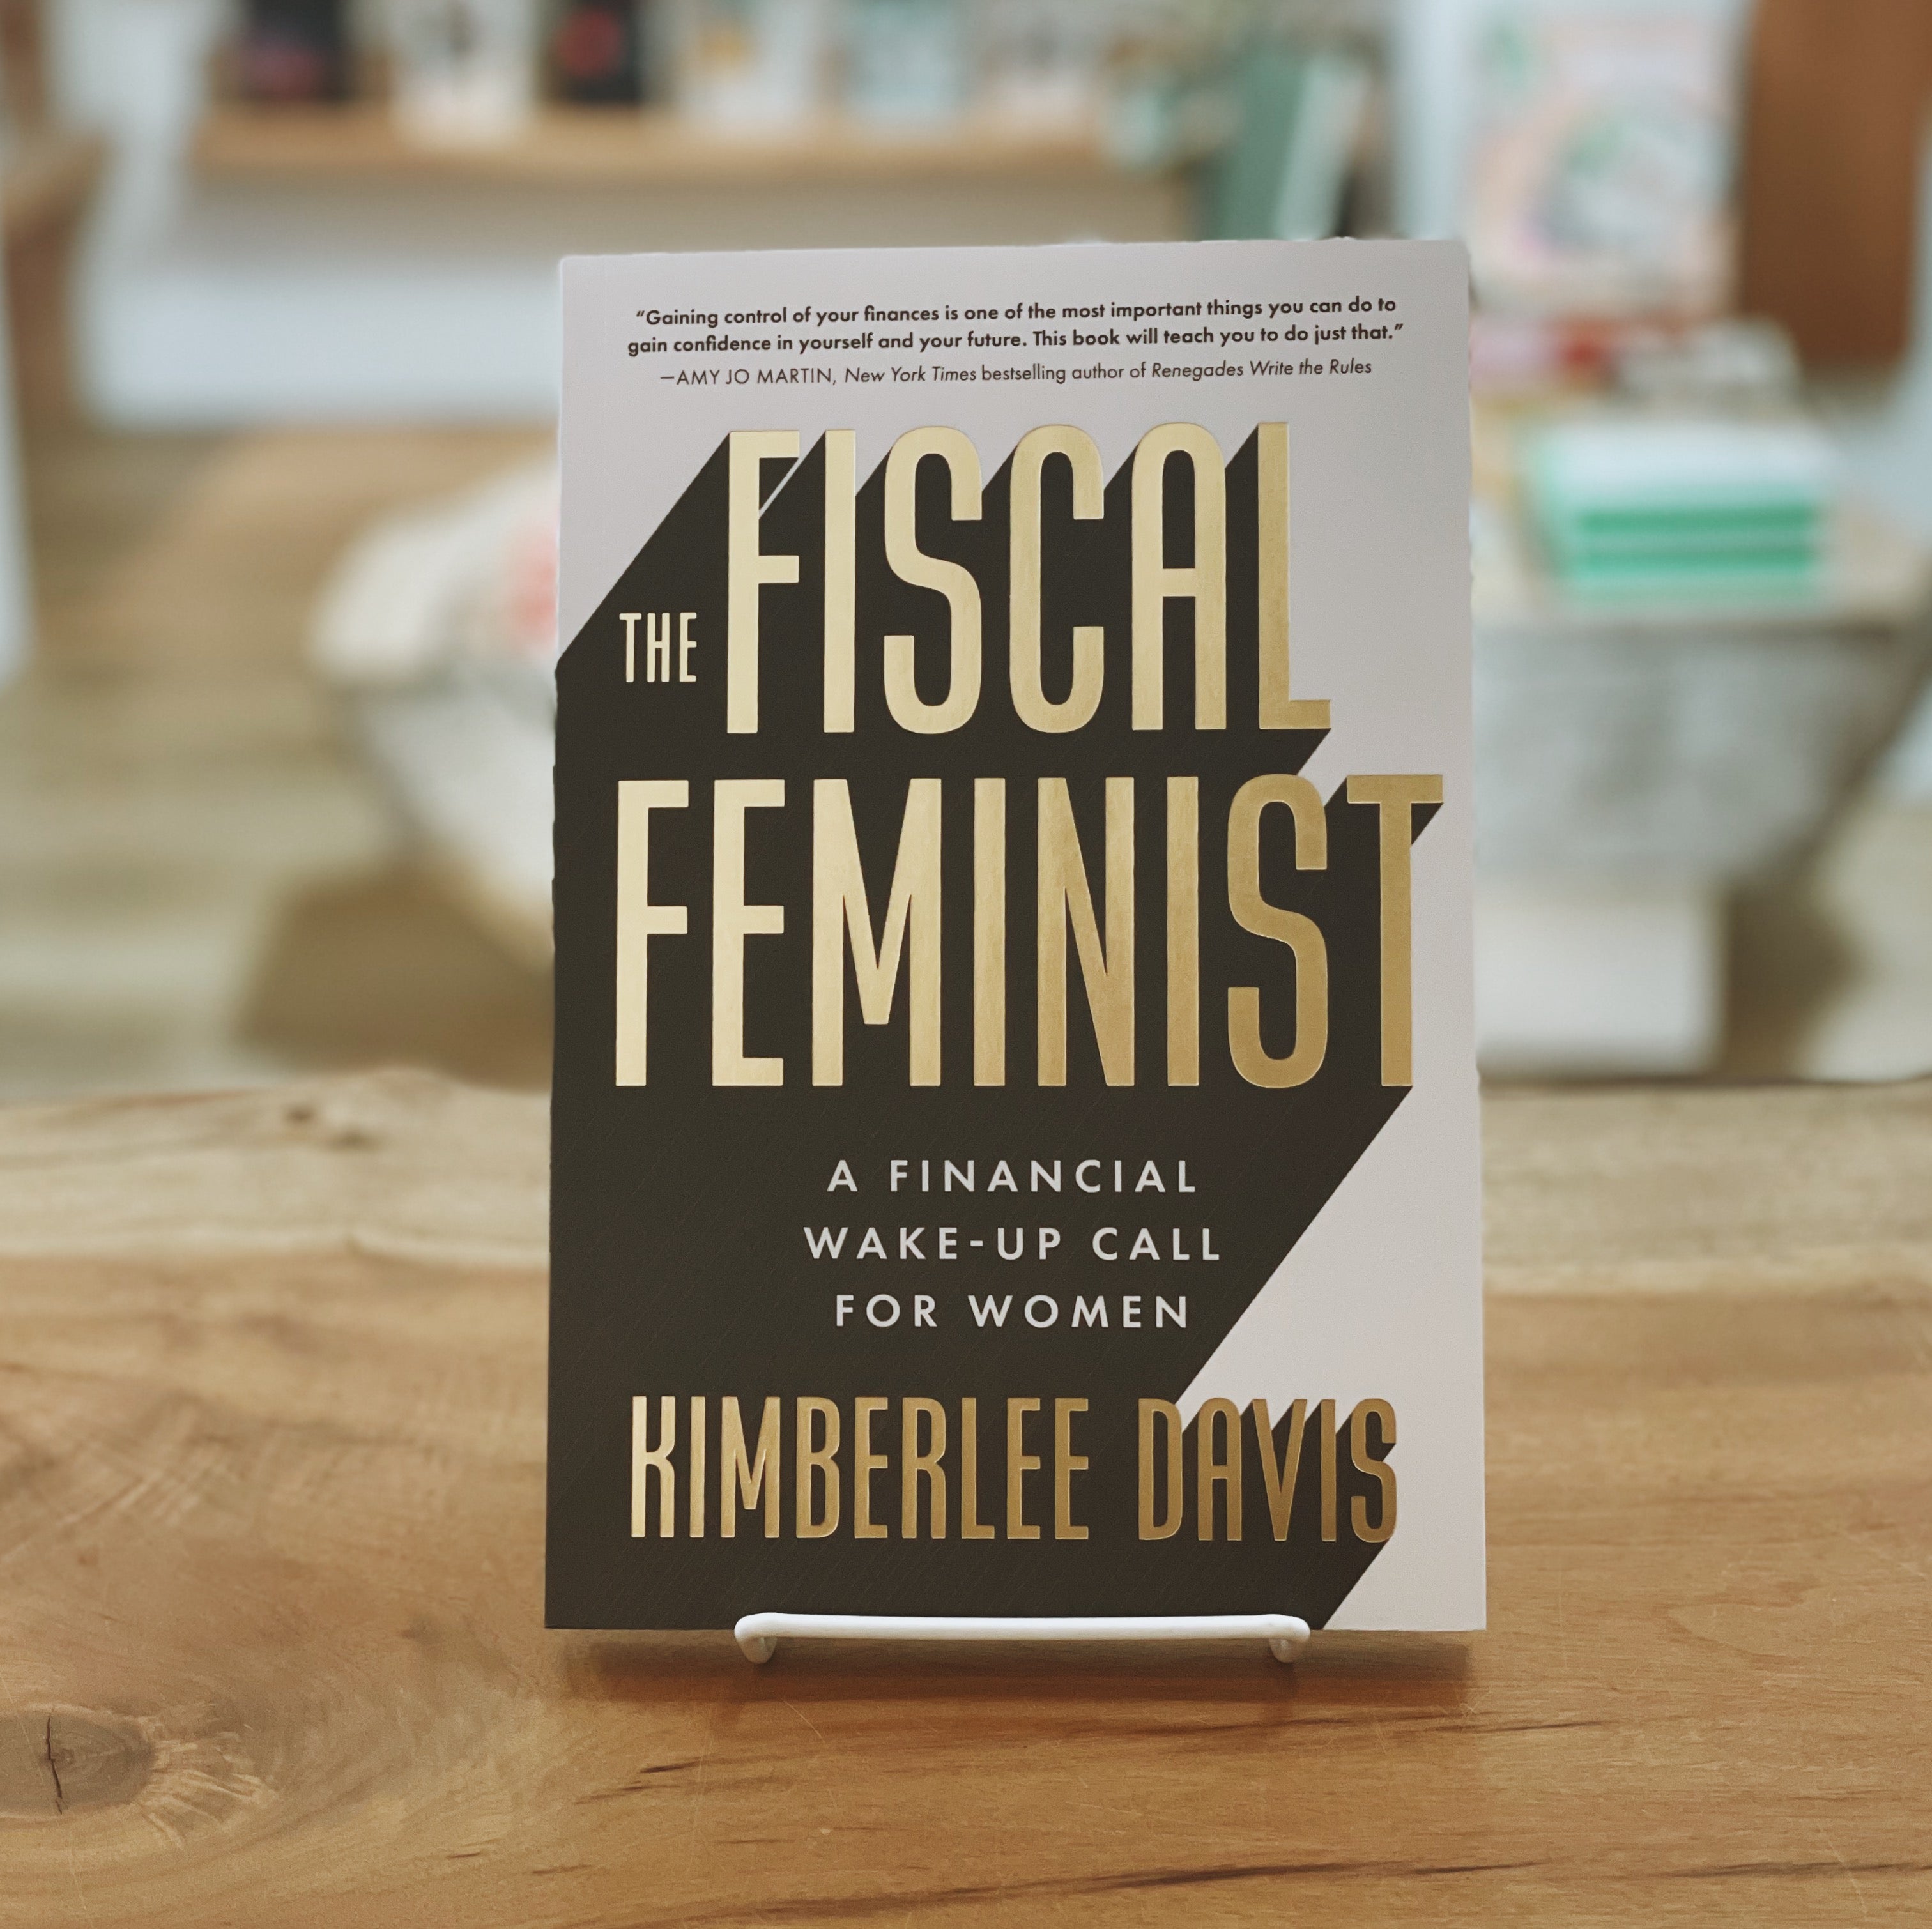 The Fiscal Feminist: A Financial Wake-up Call for Women